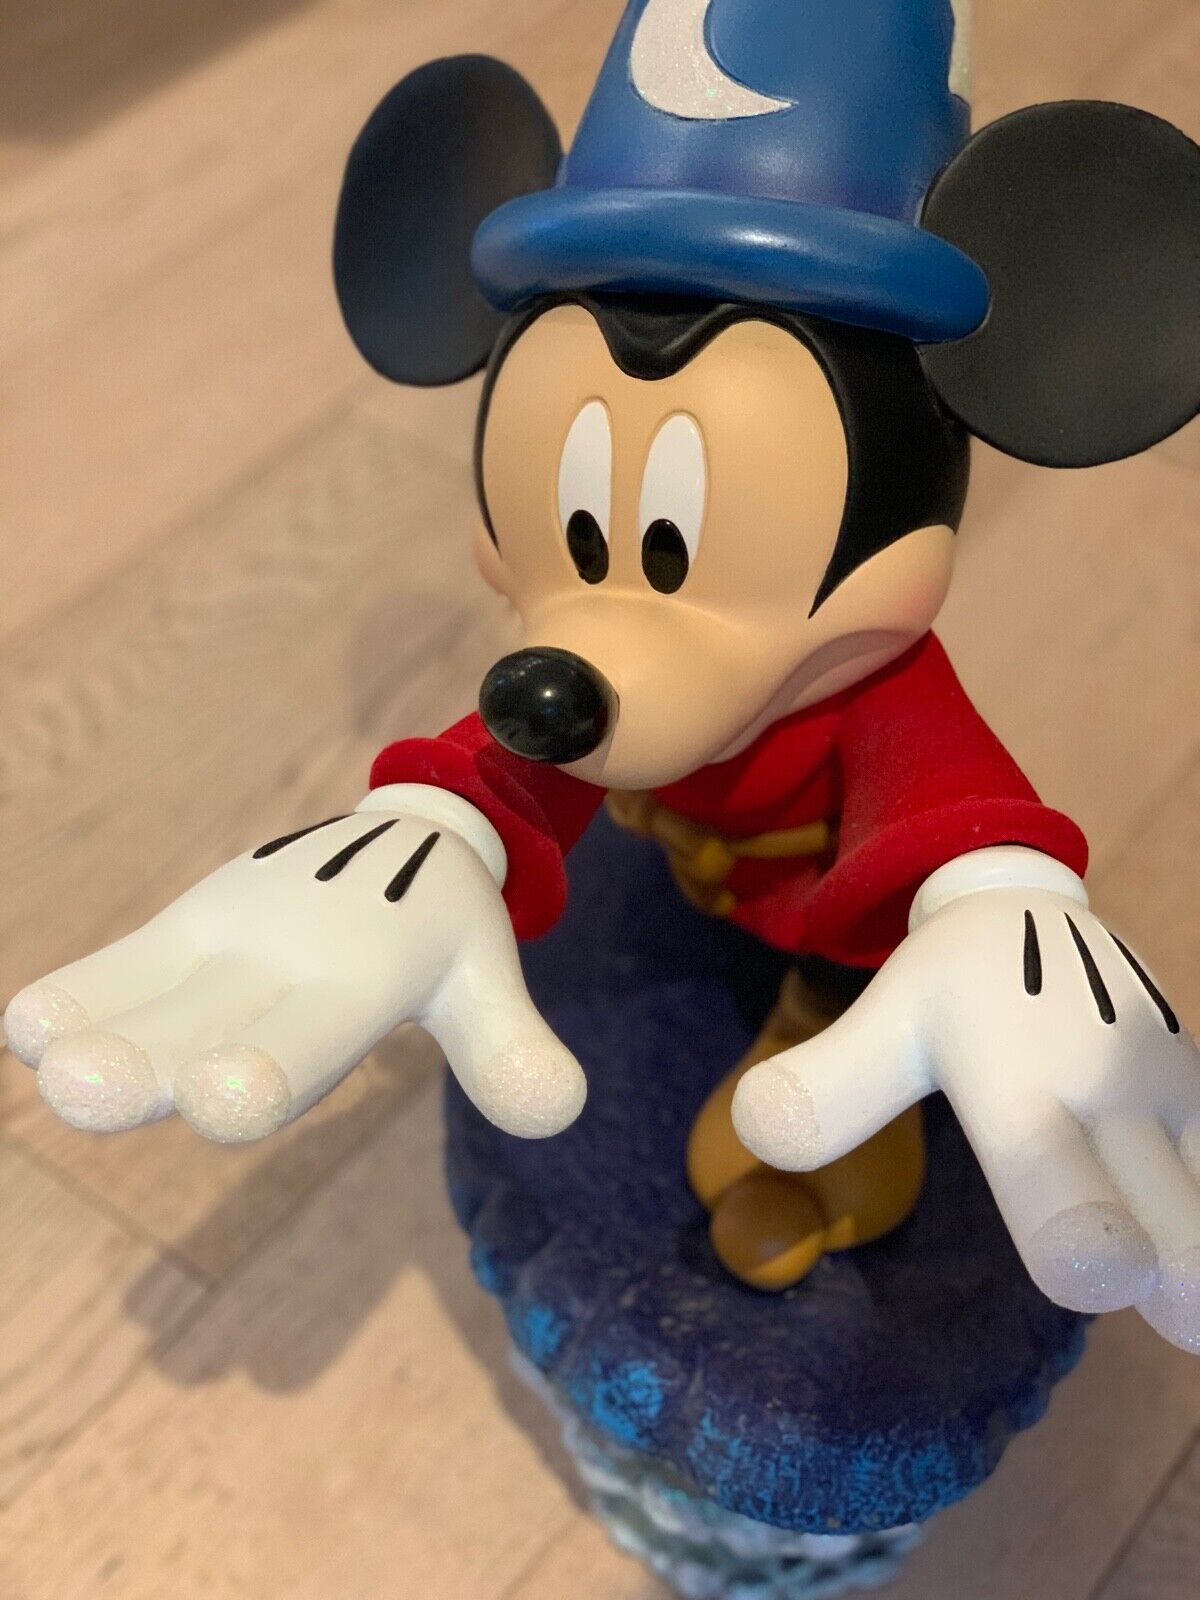 MICKEY MOUSE MEMORABILIA VINTAGE COLLECTION STATUE MONUMENT LIMITED EDITION RARE